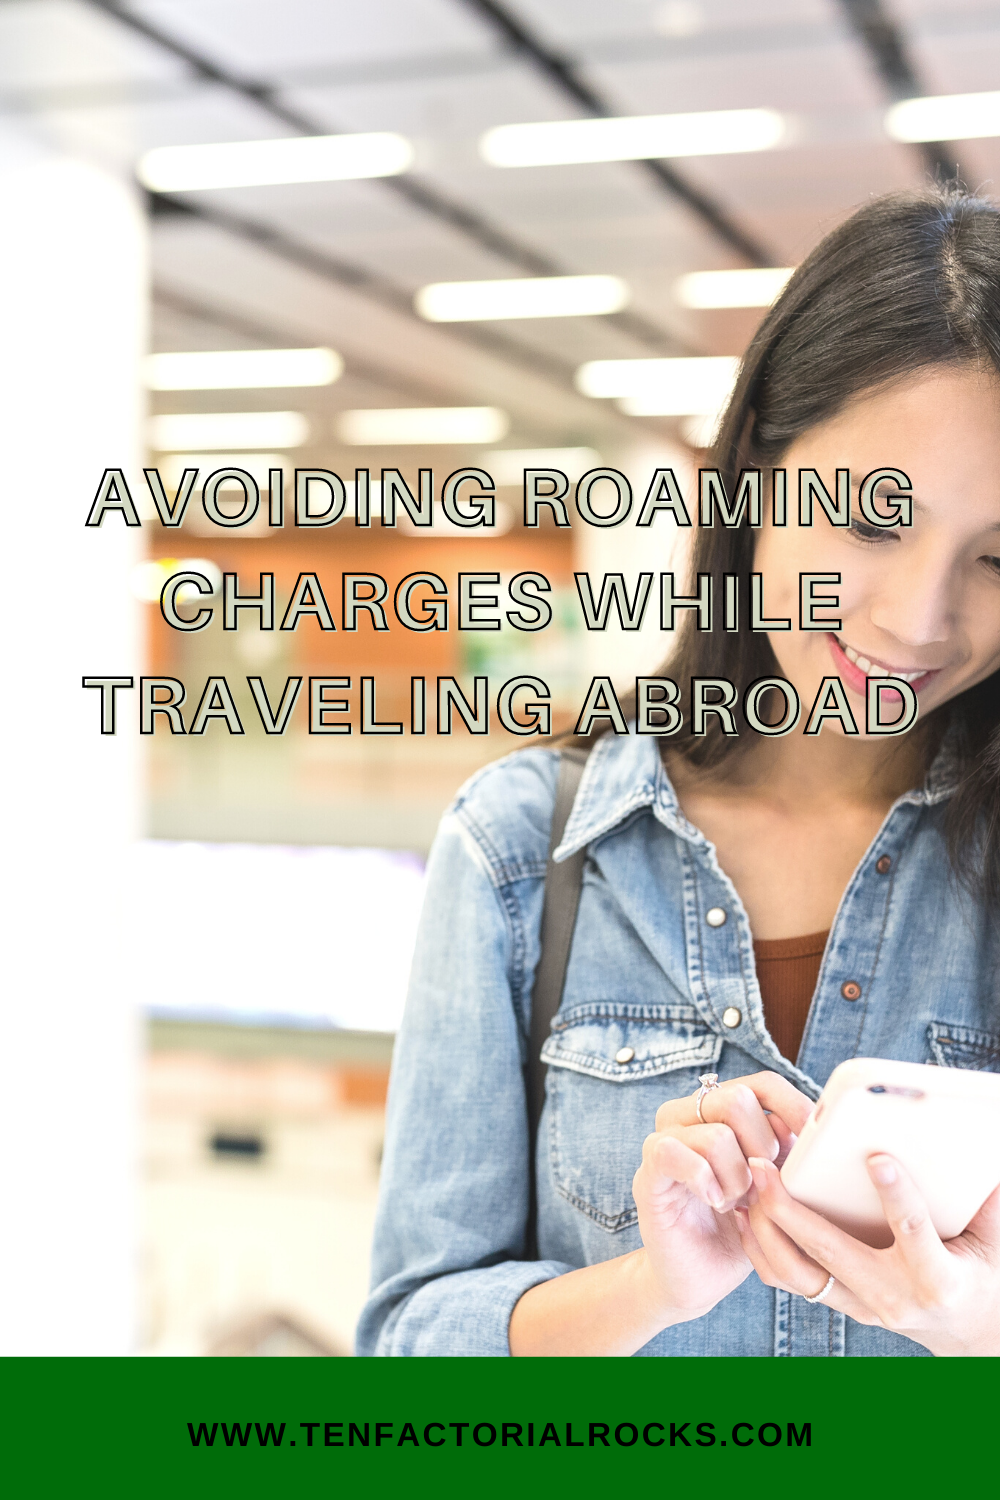 Avoiding Roaming Charges While Traveling Abroad